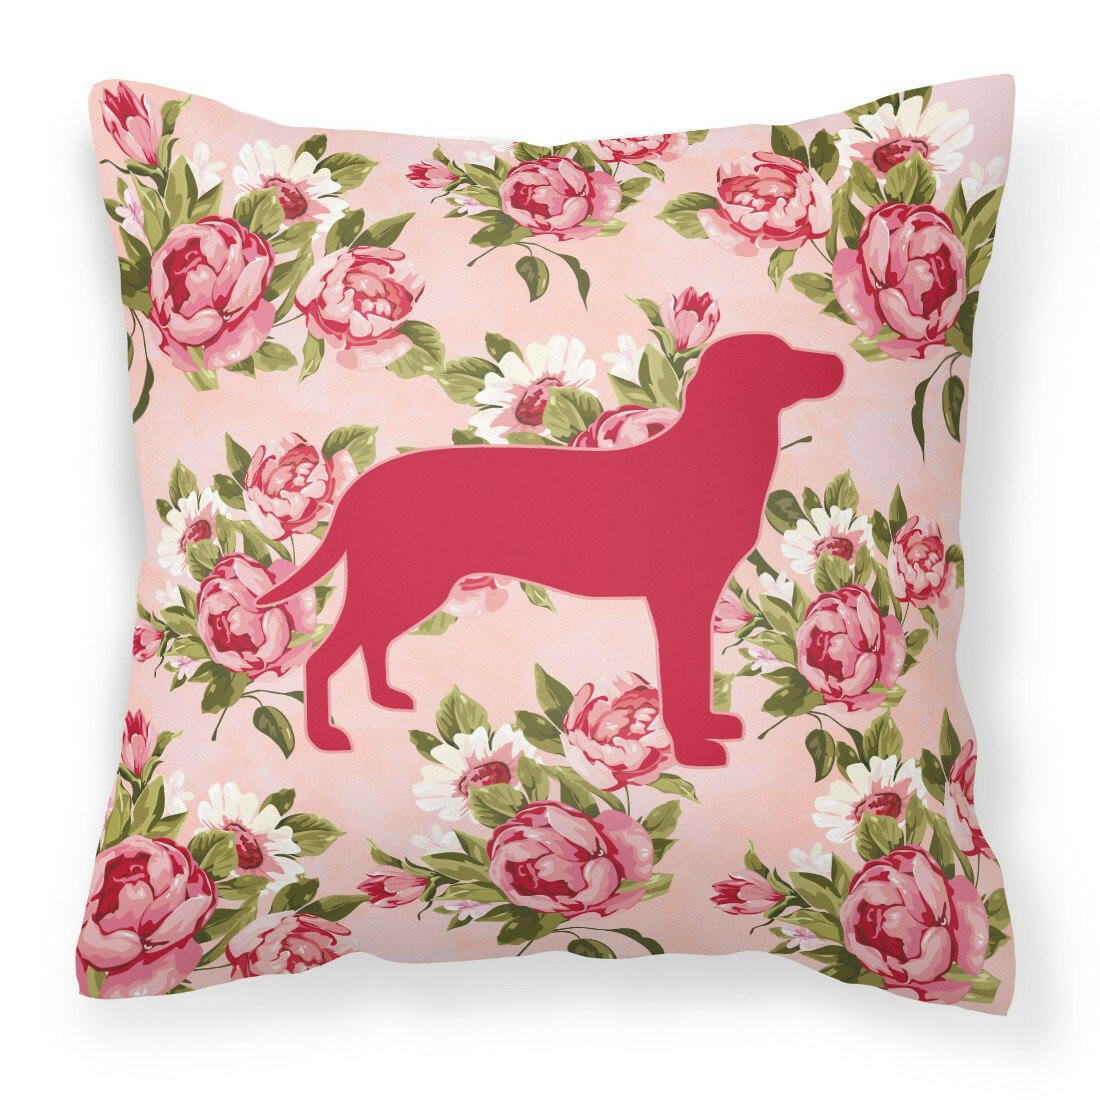 Labrador Shabby Chic Pink Roses  Fabric Decorative Pillow BB1116-RS-PK-PW1414 - the-store.com